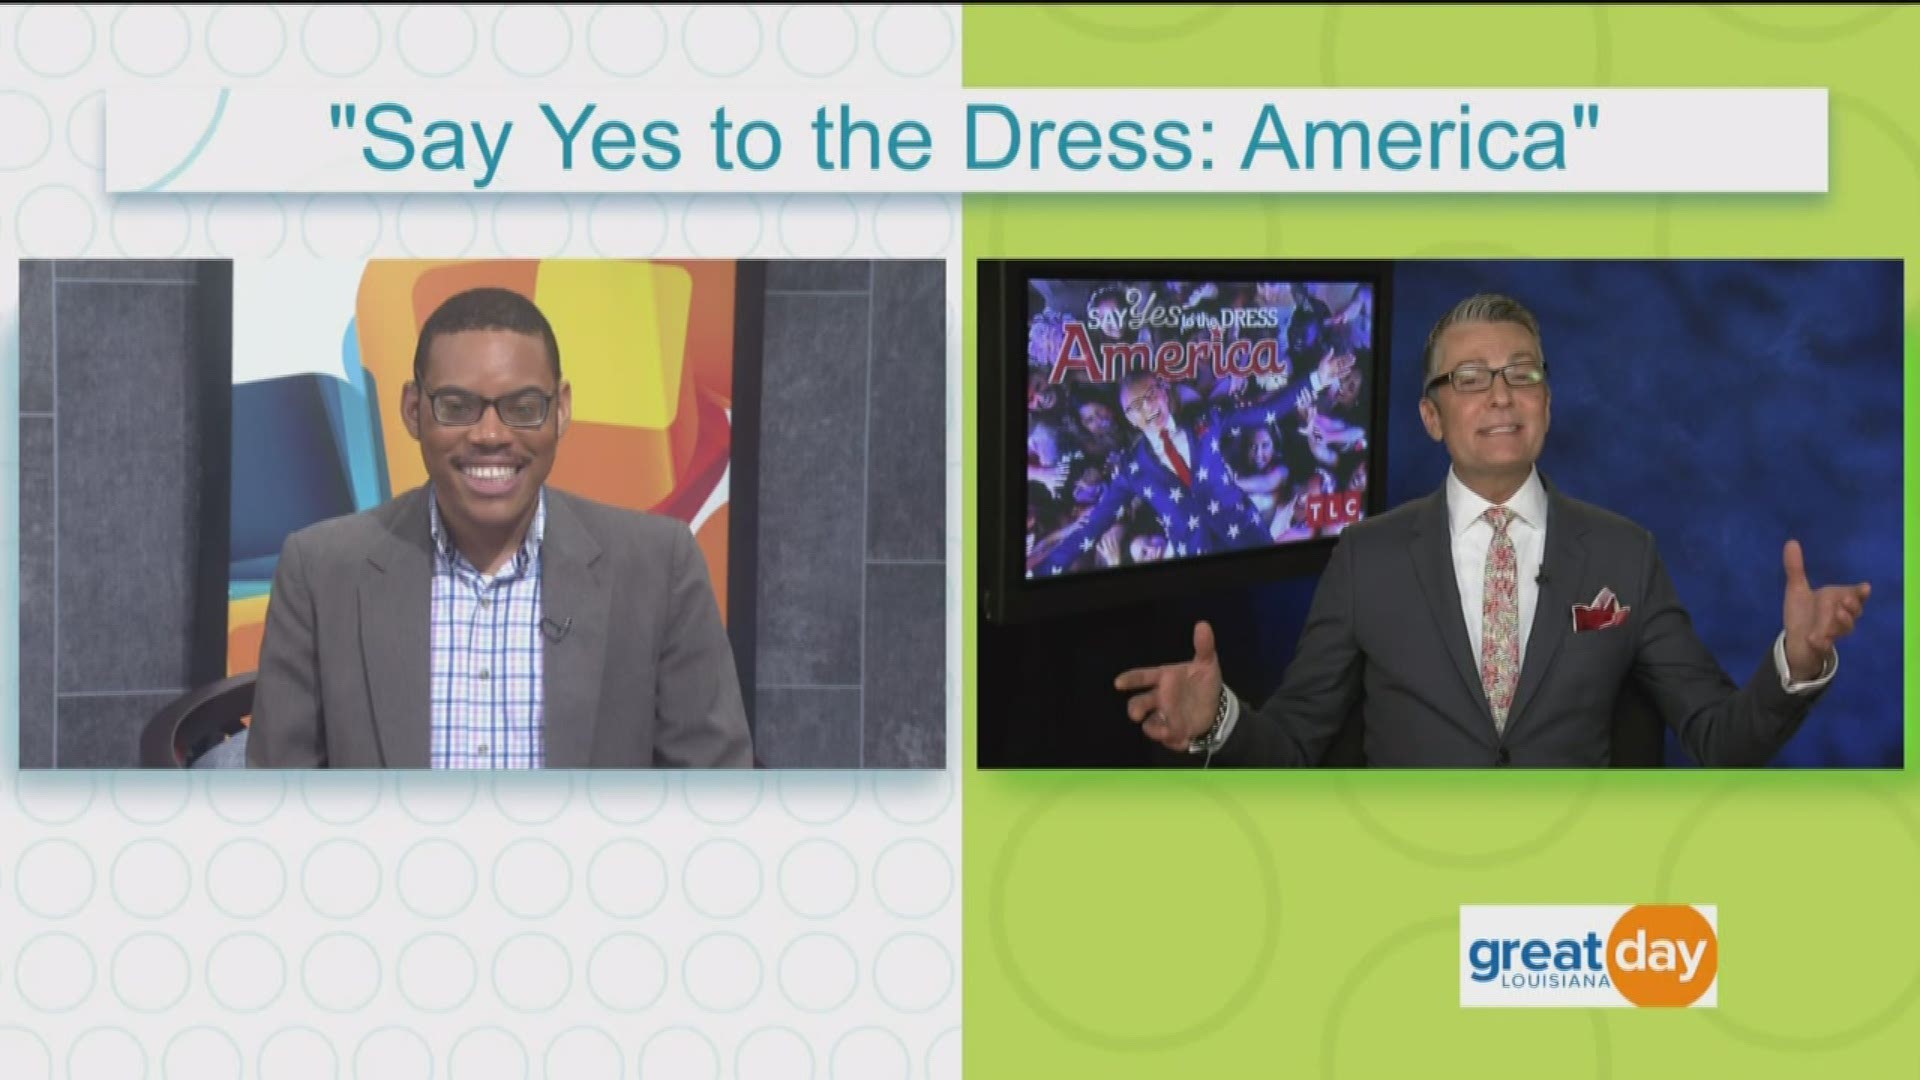 Randy Fenoli, host of "Say Yes to the Dress: America" discussed his new show on TLC and shared some tips on wedding dresses for brides.